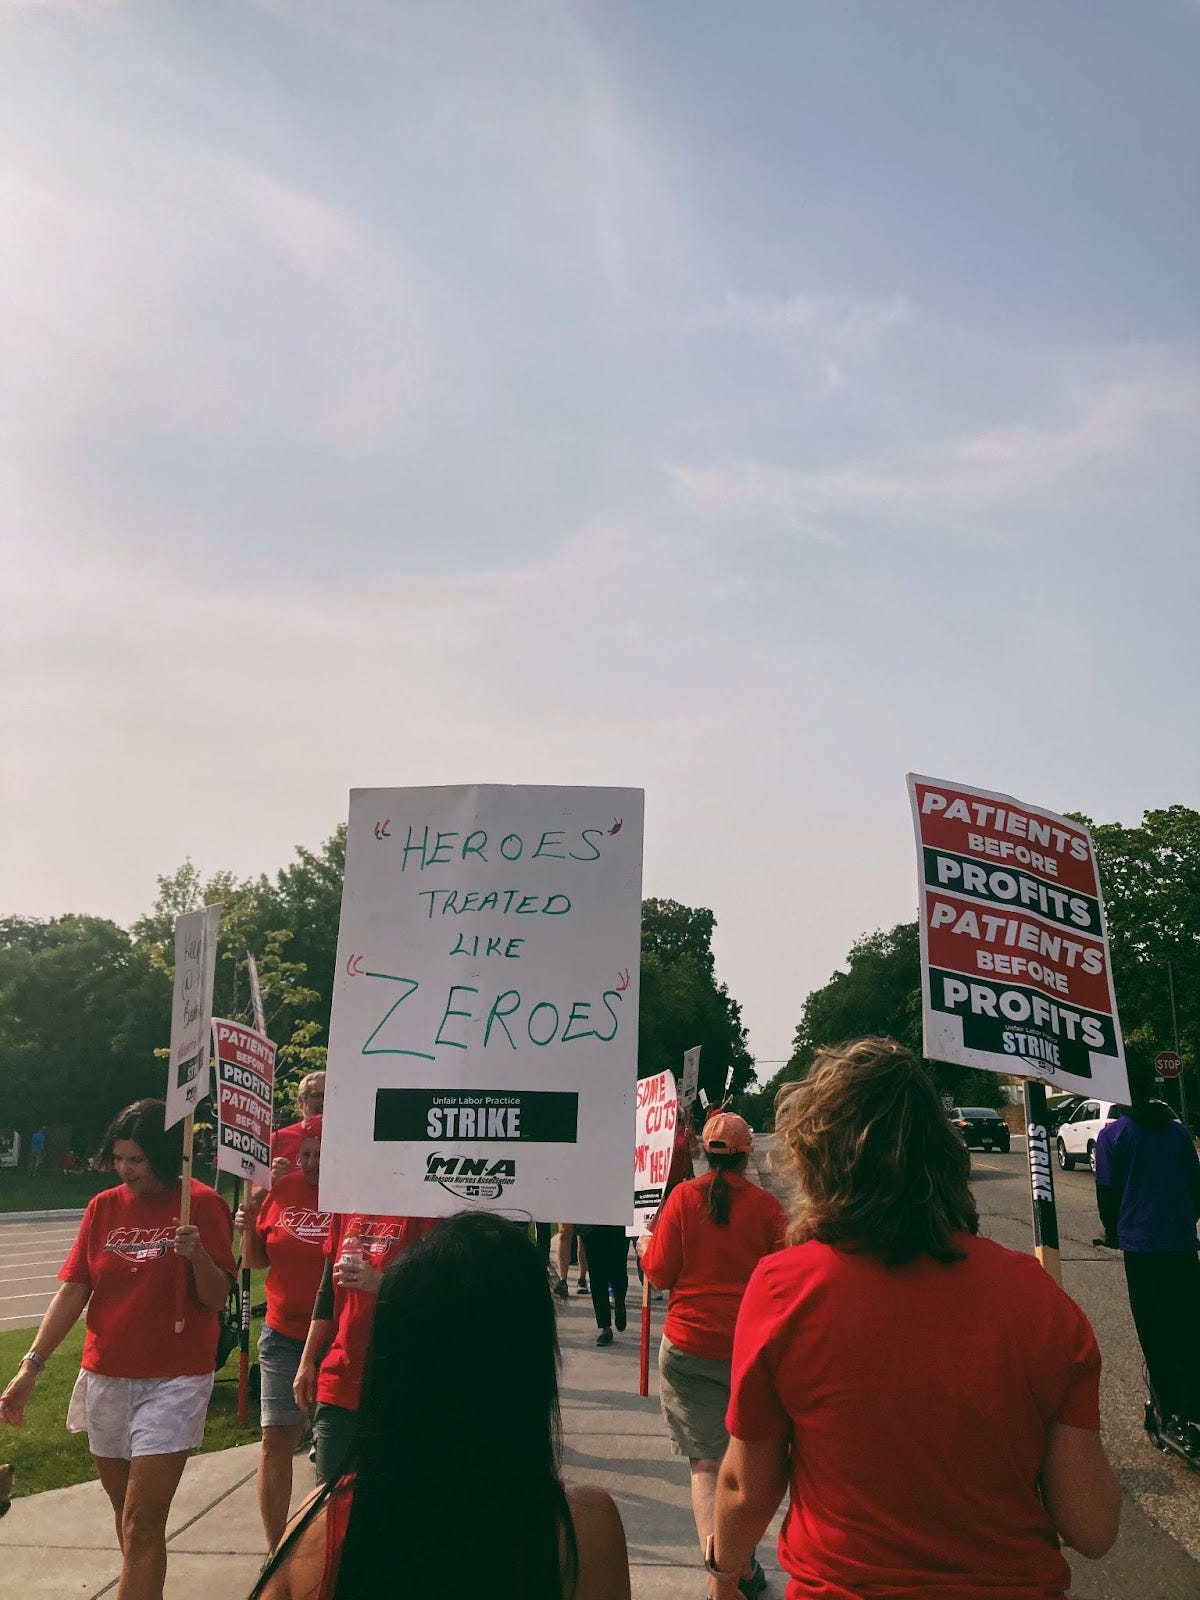 picketers wearing red shirts carry signs that read "heroes treated like zeroes" and "patients before profits"